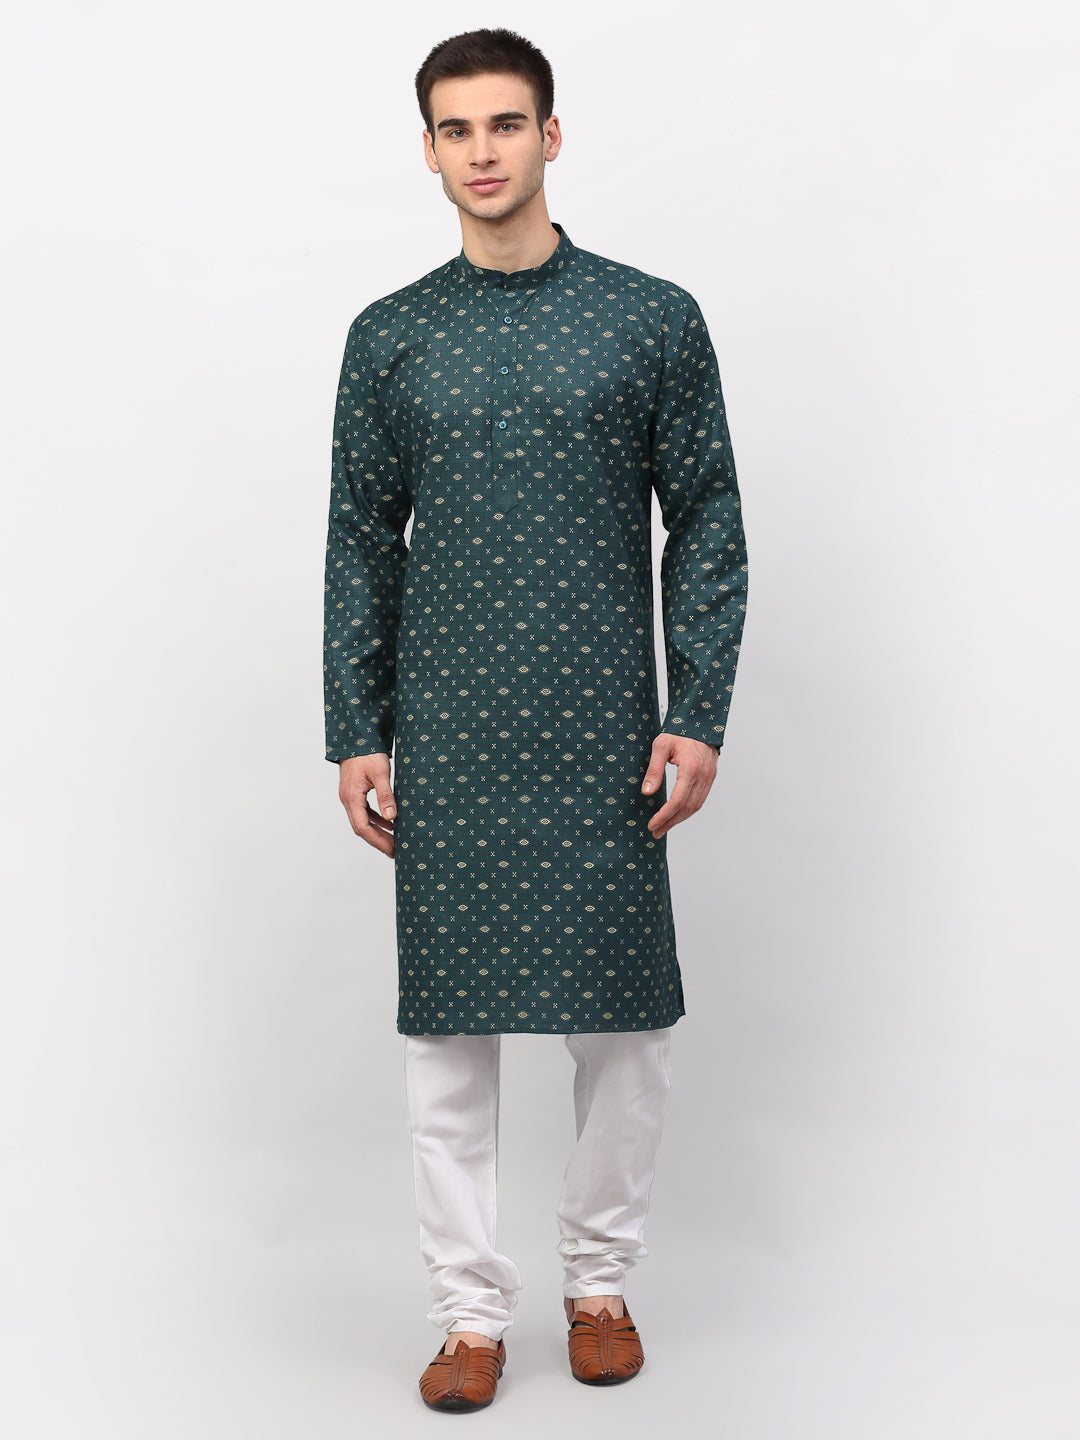 Jompers Men's Olive Printed Cotton Kurta Only